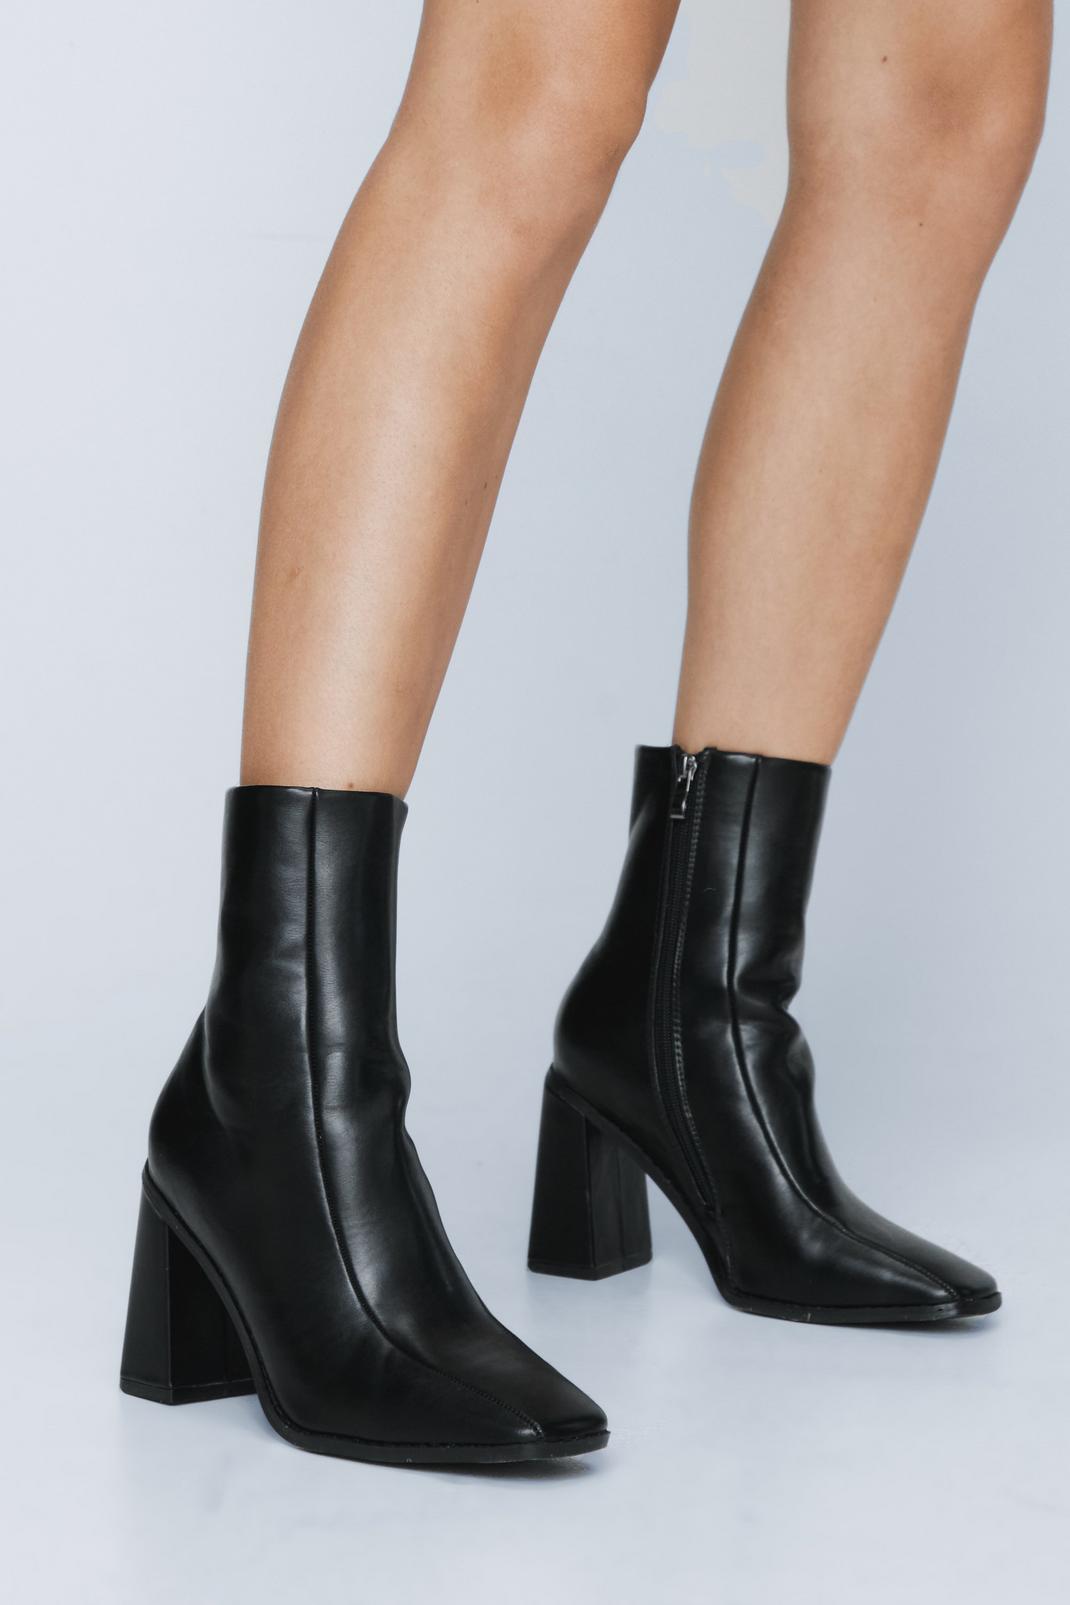 Square Up Sock Boot | Nasty Gal